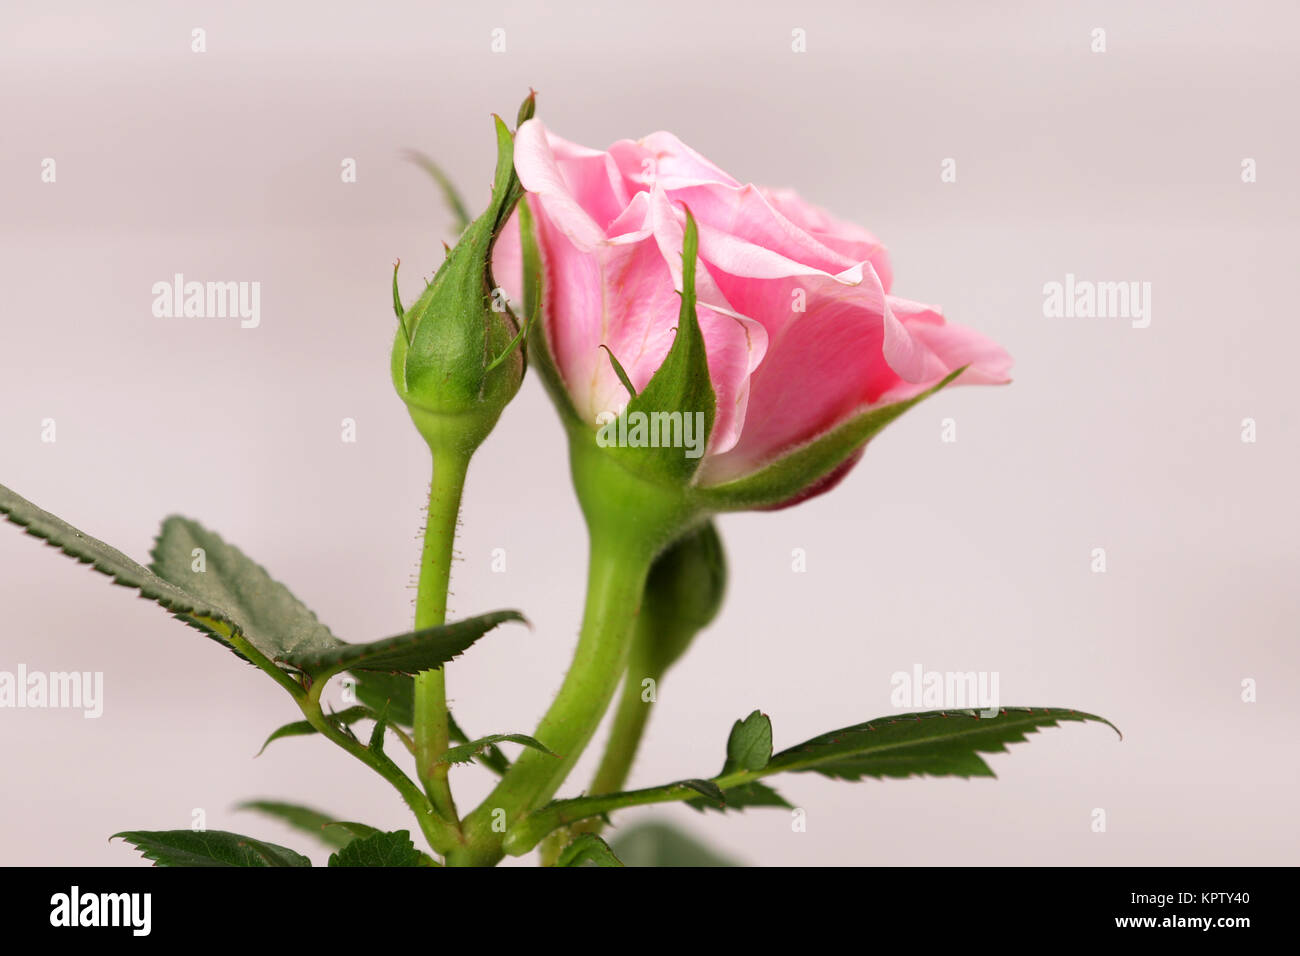 roses for mother's day as a gift Stock Photo